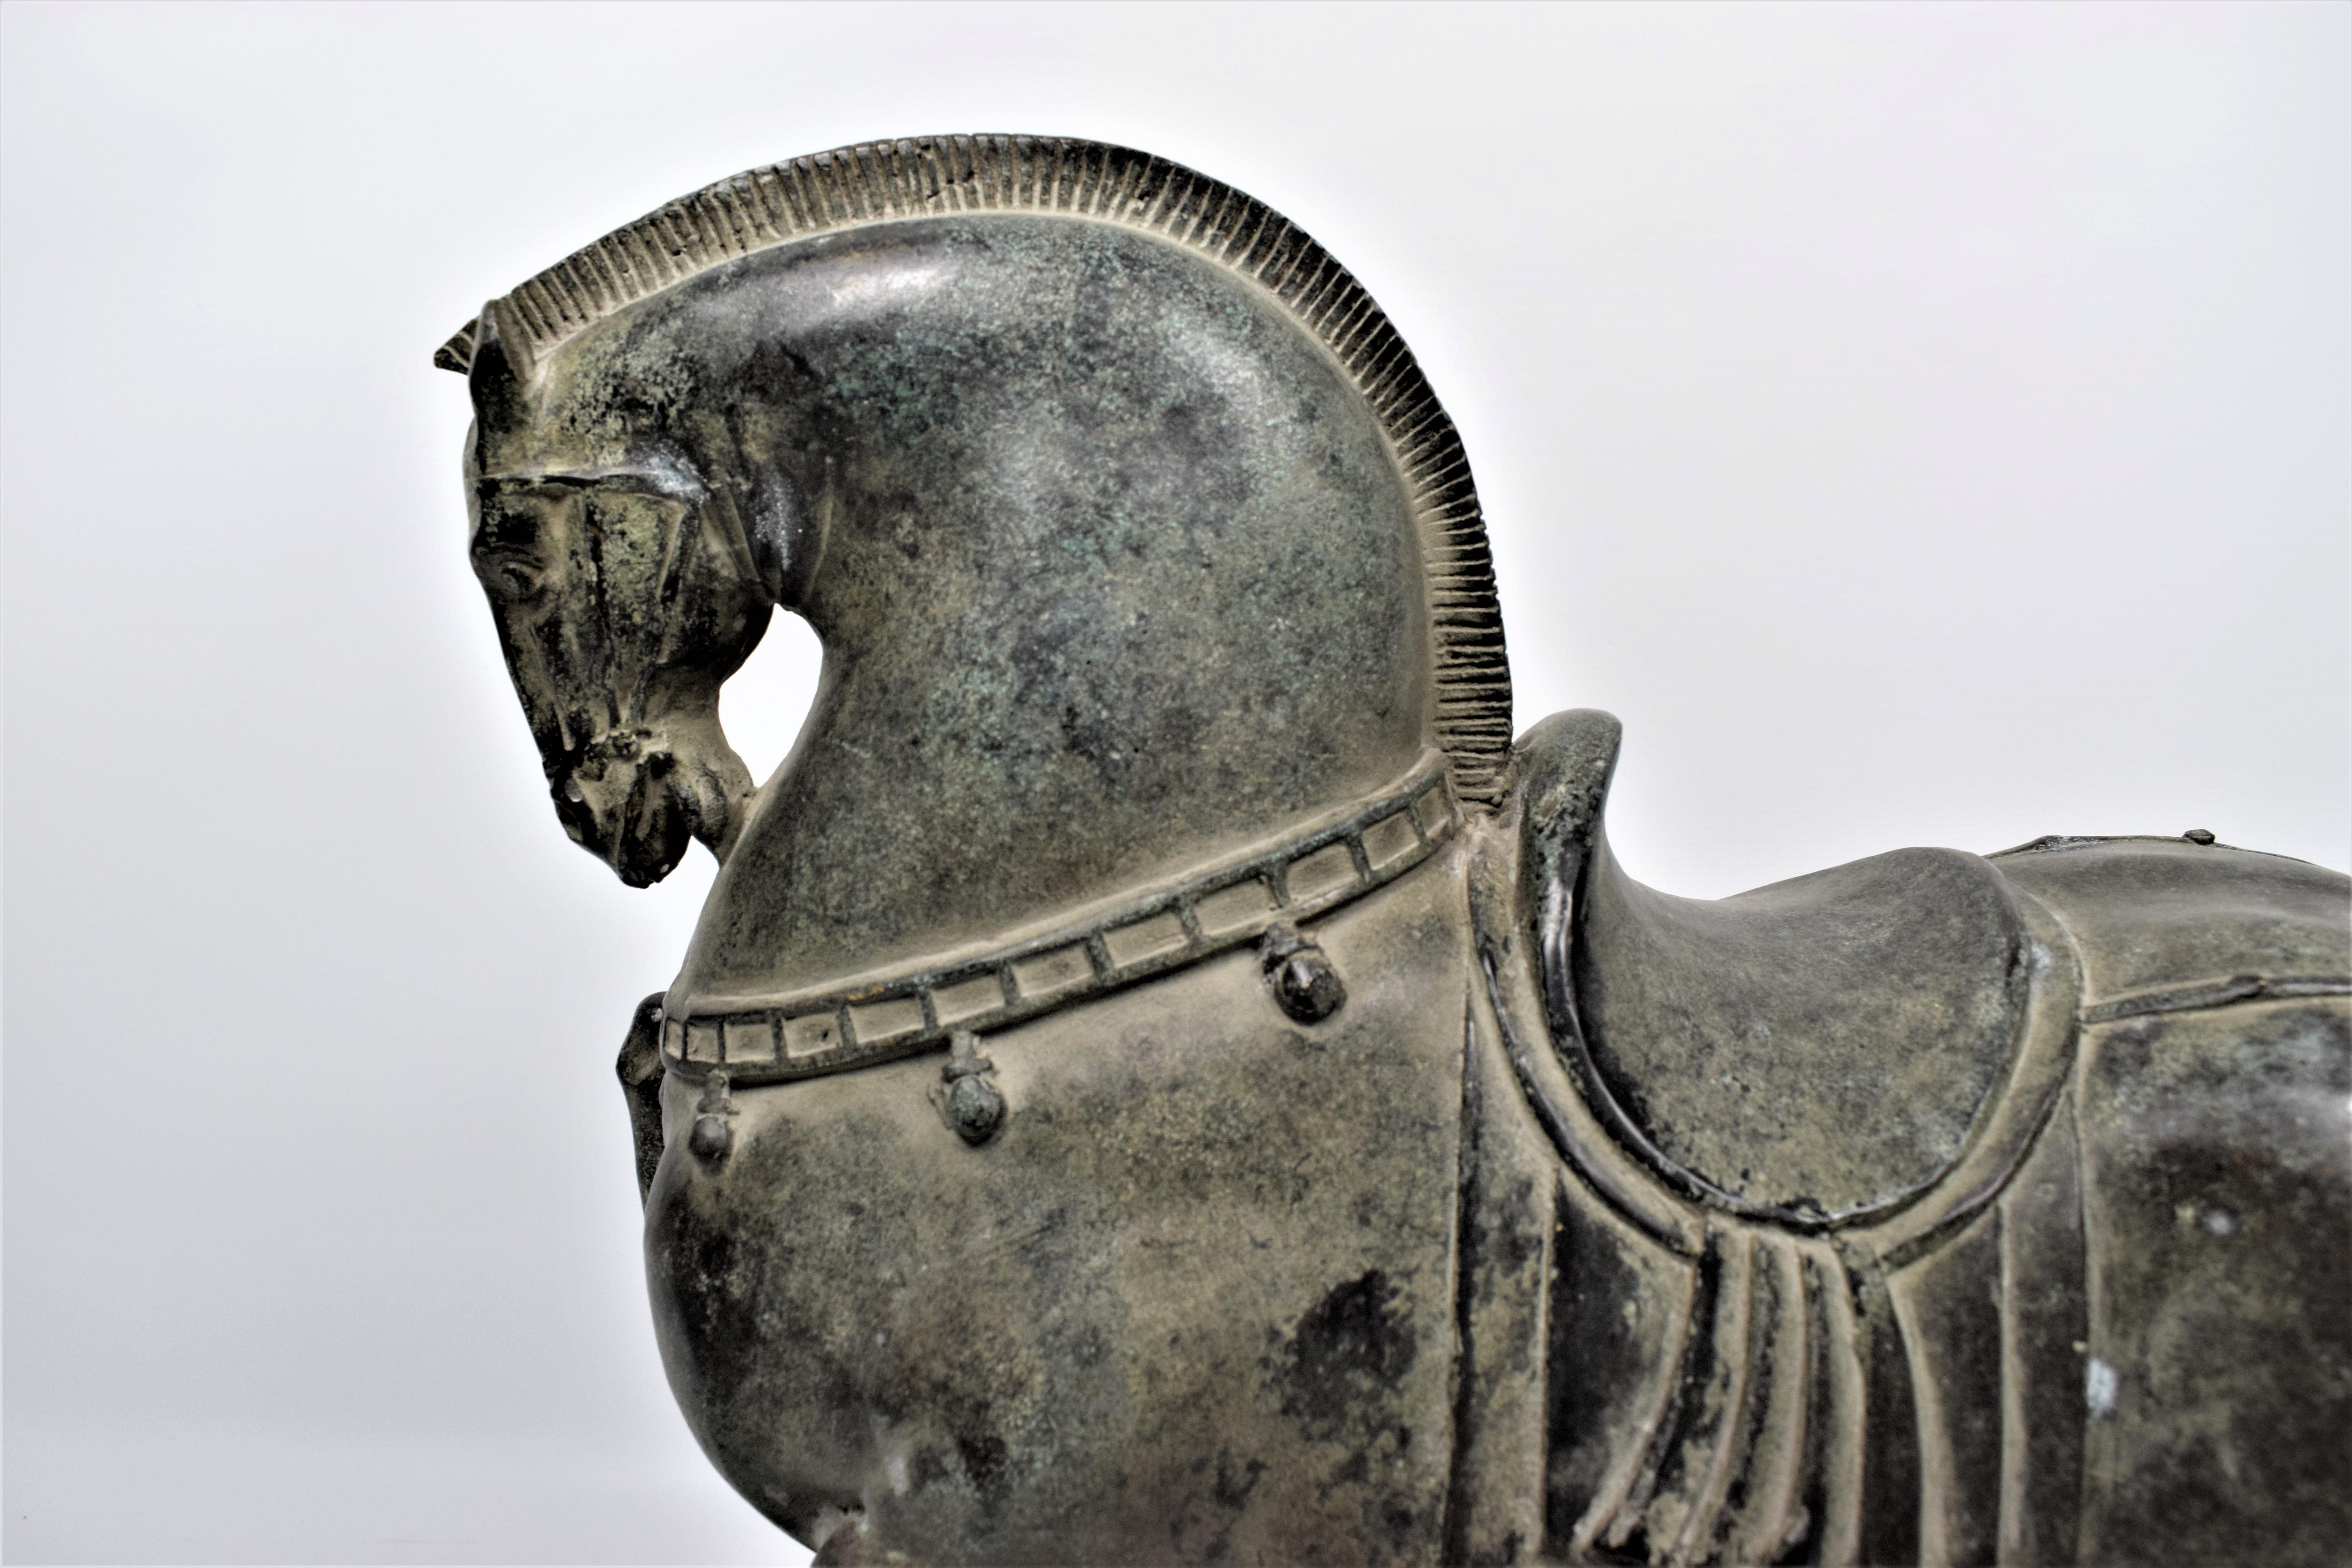 Art Deco Asian Tang dynasty inspired bronze horse

During China's Tang dynasty, horses were loved and revered as symbols of imperial power. The horse itself was a potent image during the vigorous Expansion of the Tang 